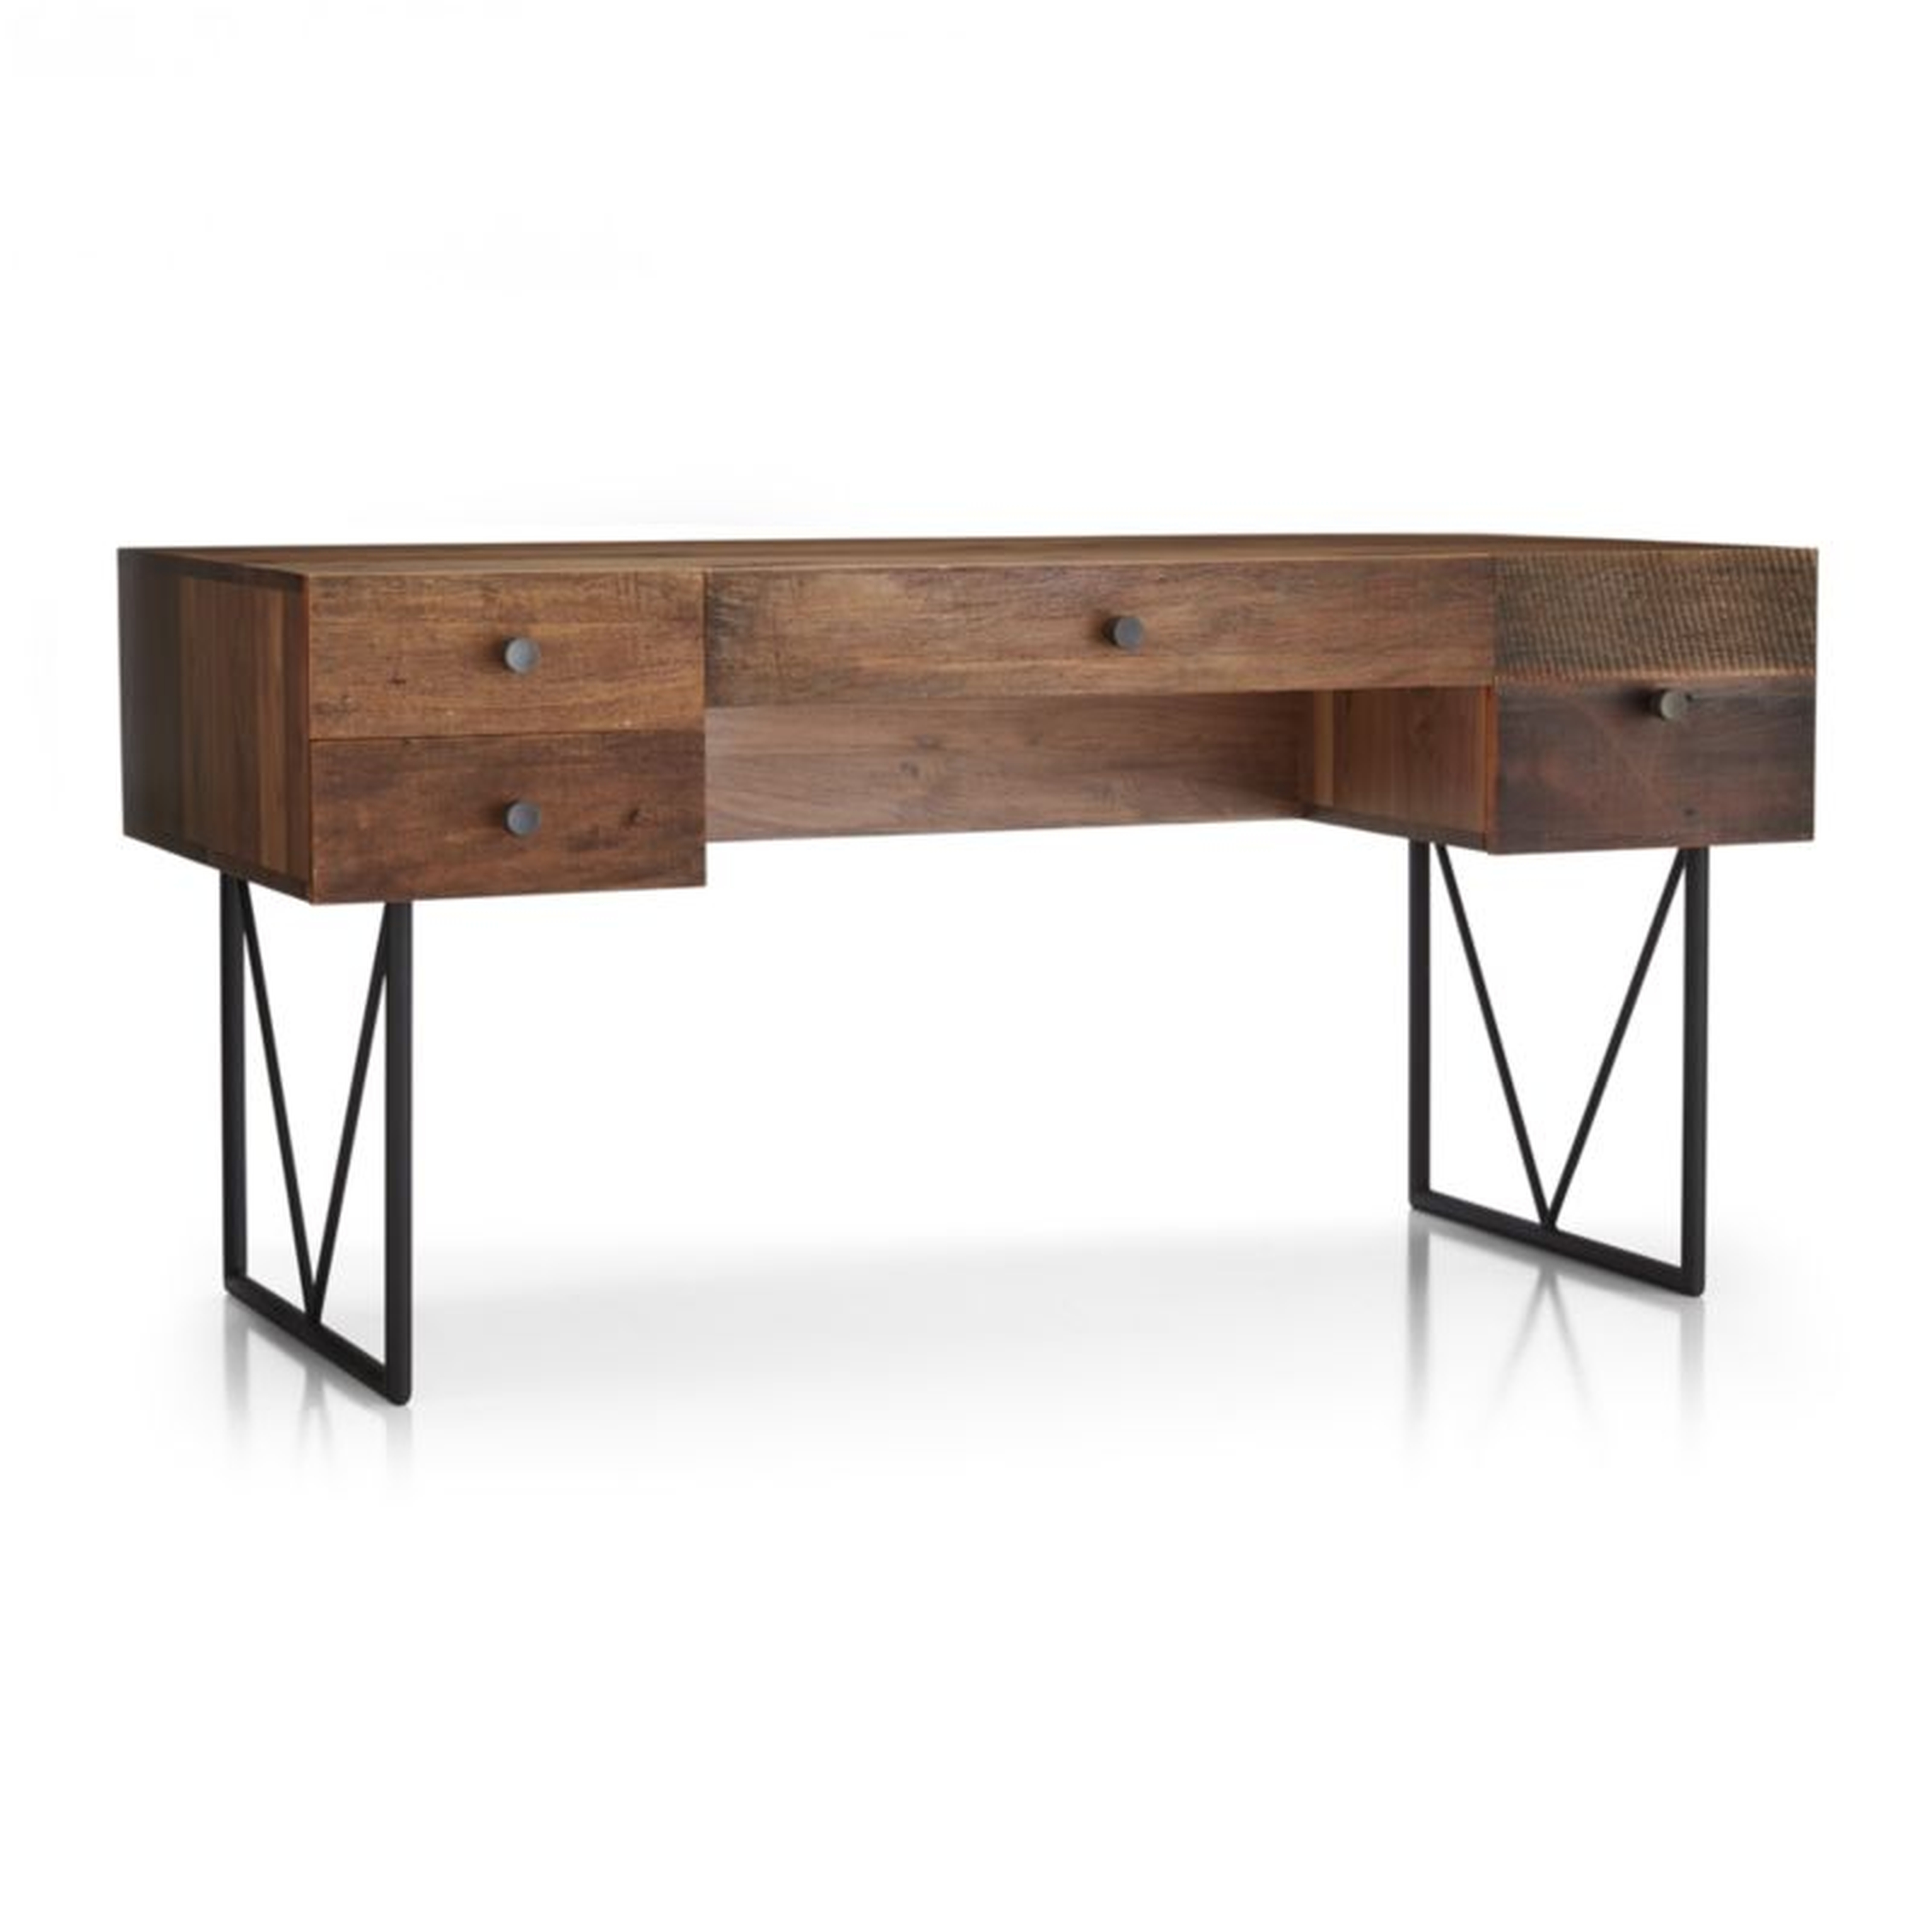 Atwood Desk - Crate and Barrel